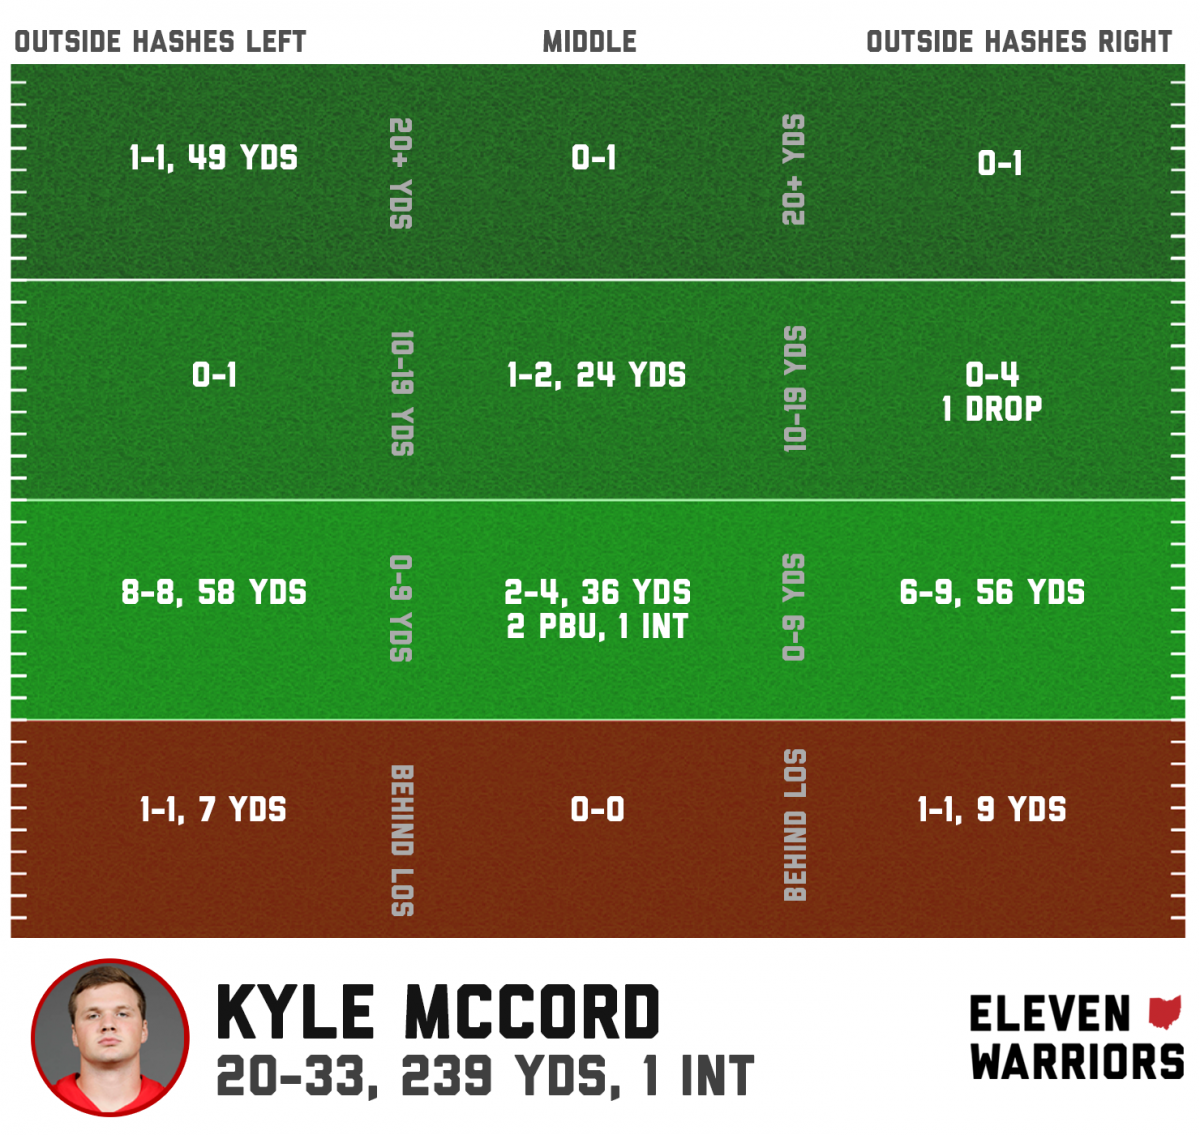 Kyle McCord's passing chart vs. Indiana